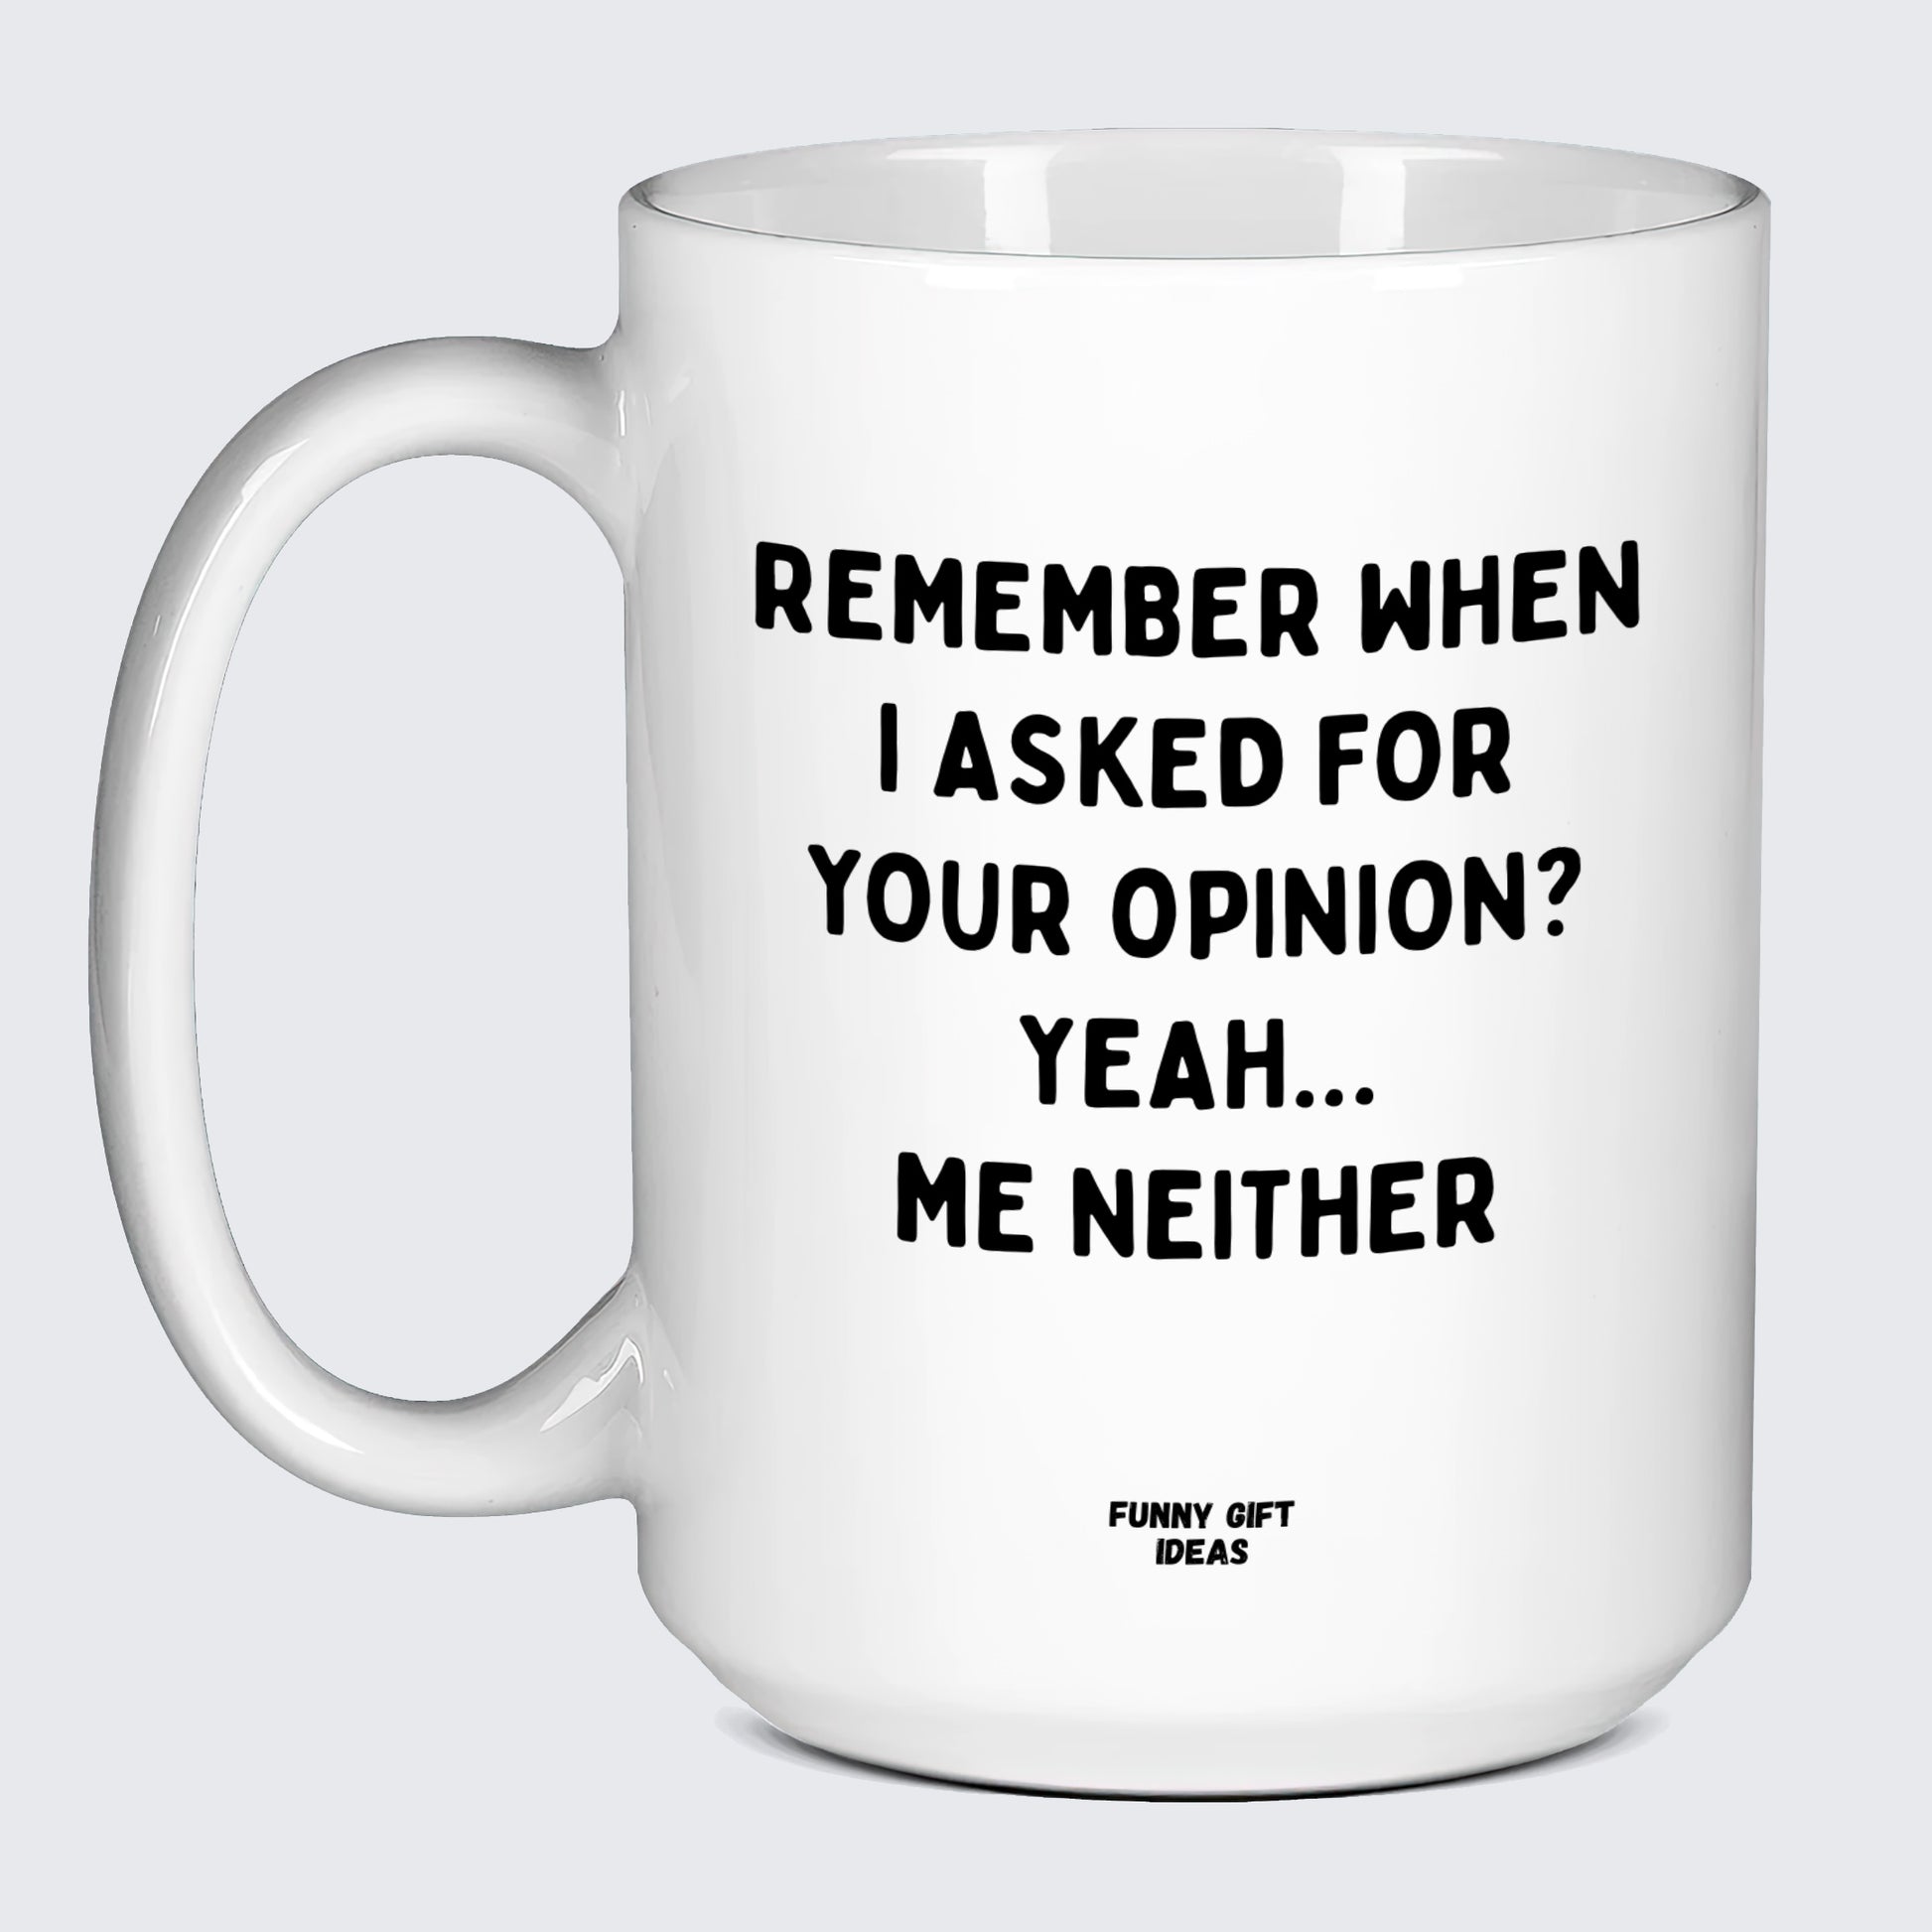 Cool Mugs Remember When I Asked for Your Opinion? Yeah... Me Neither - Funny Gift Ideas